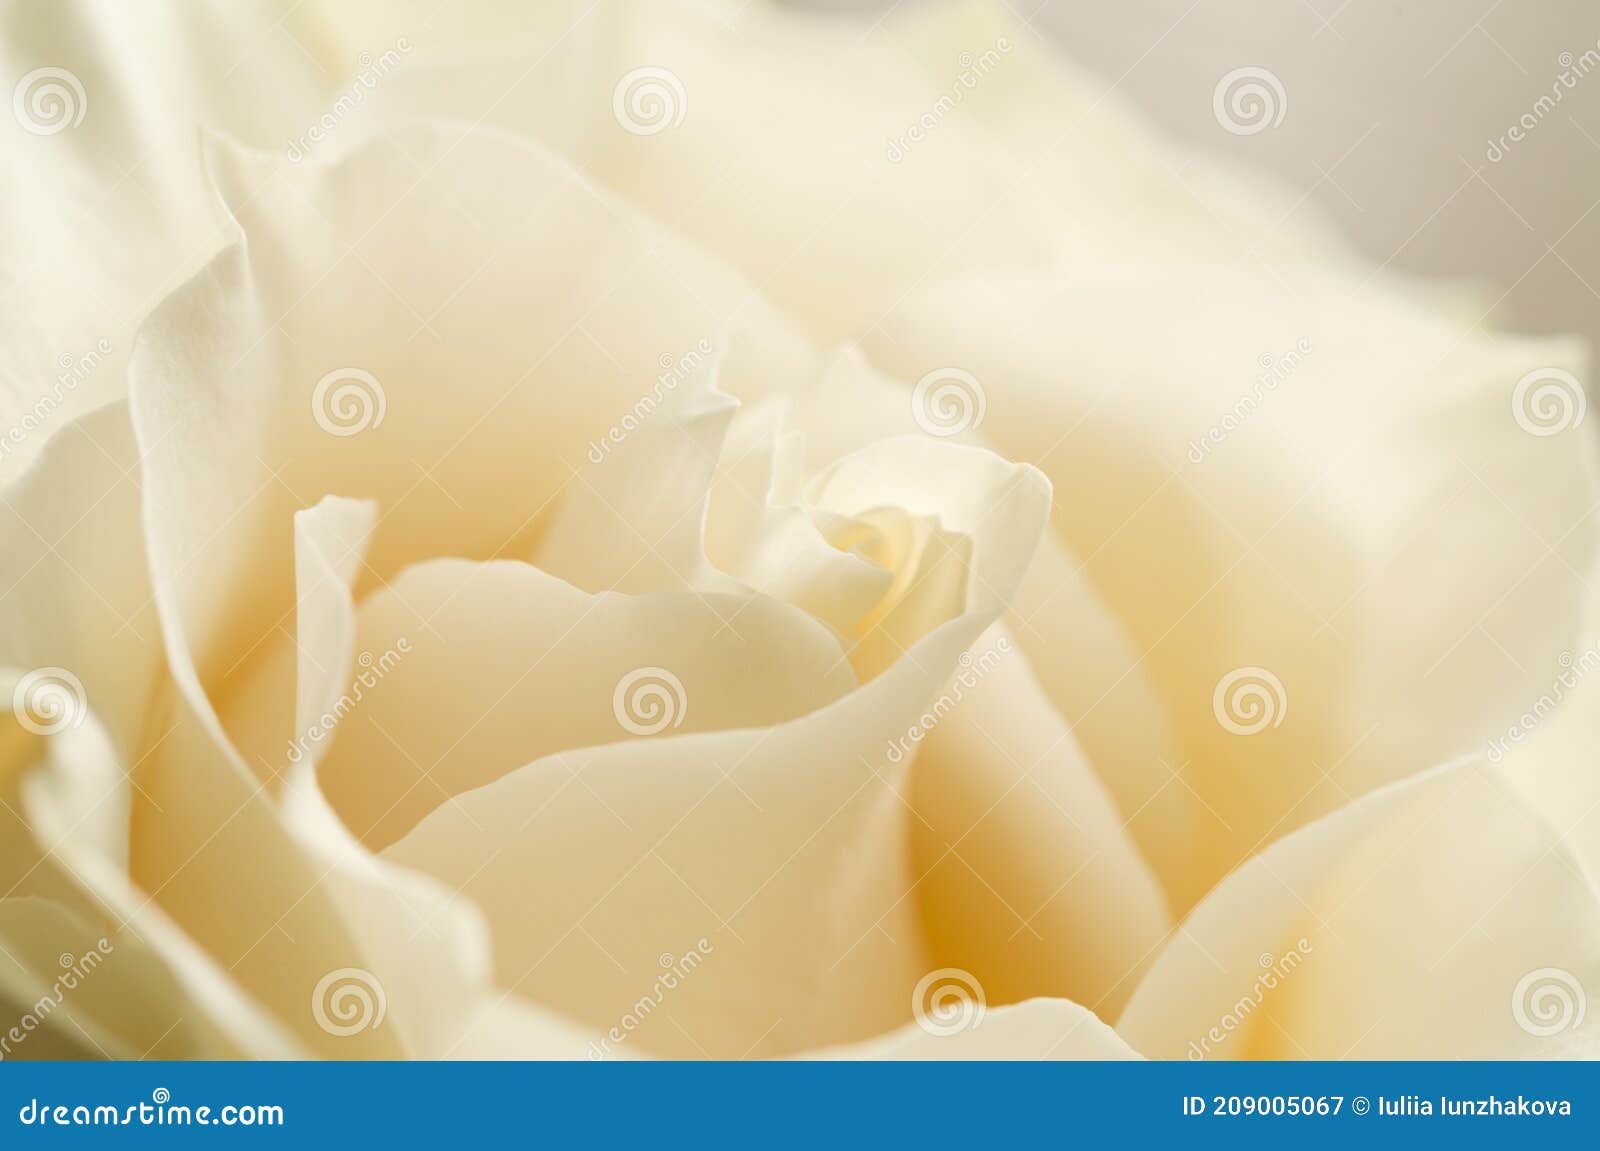 beautiful white chocolate or creme rose petals close up with soft focus.